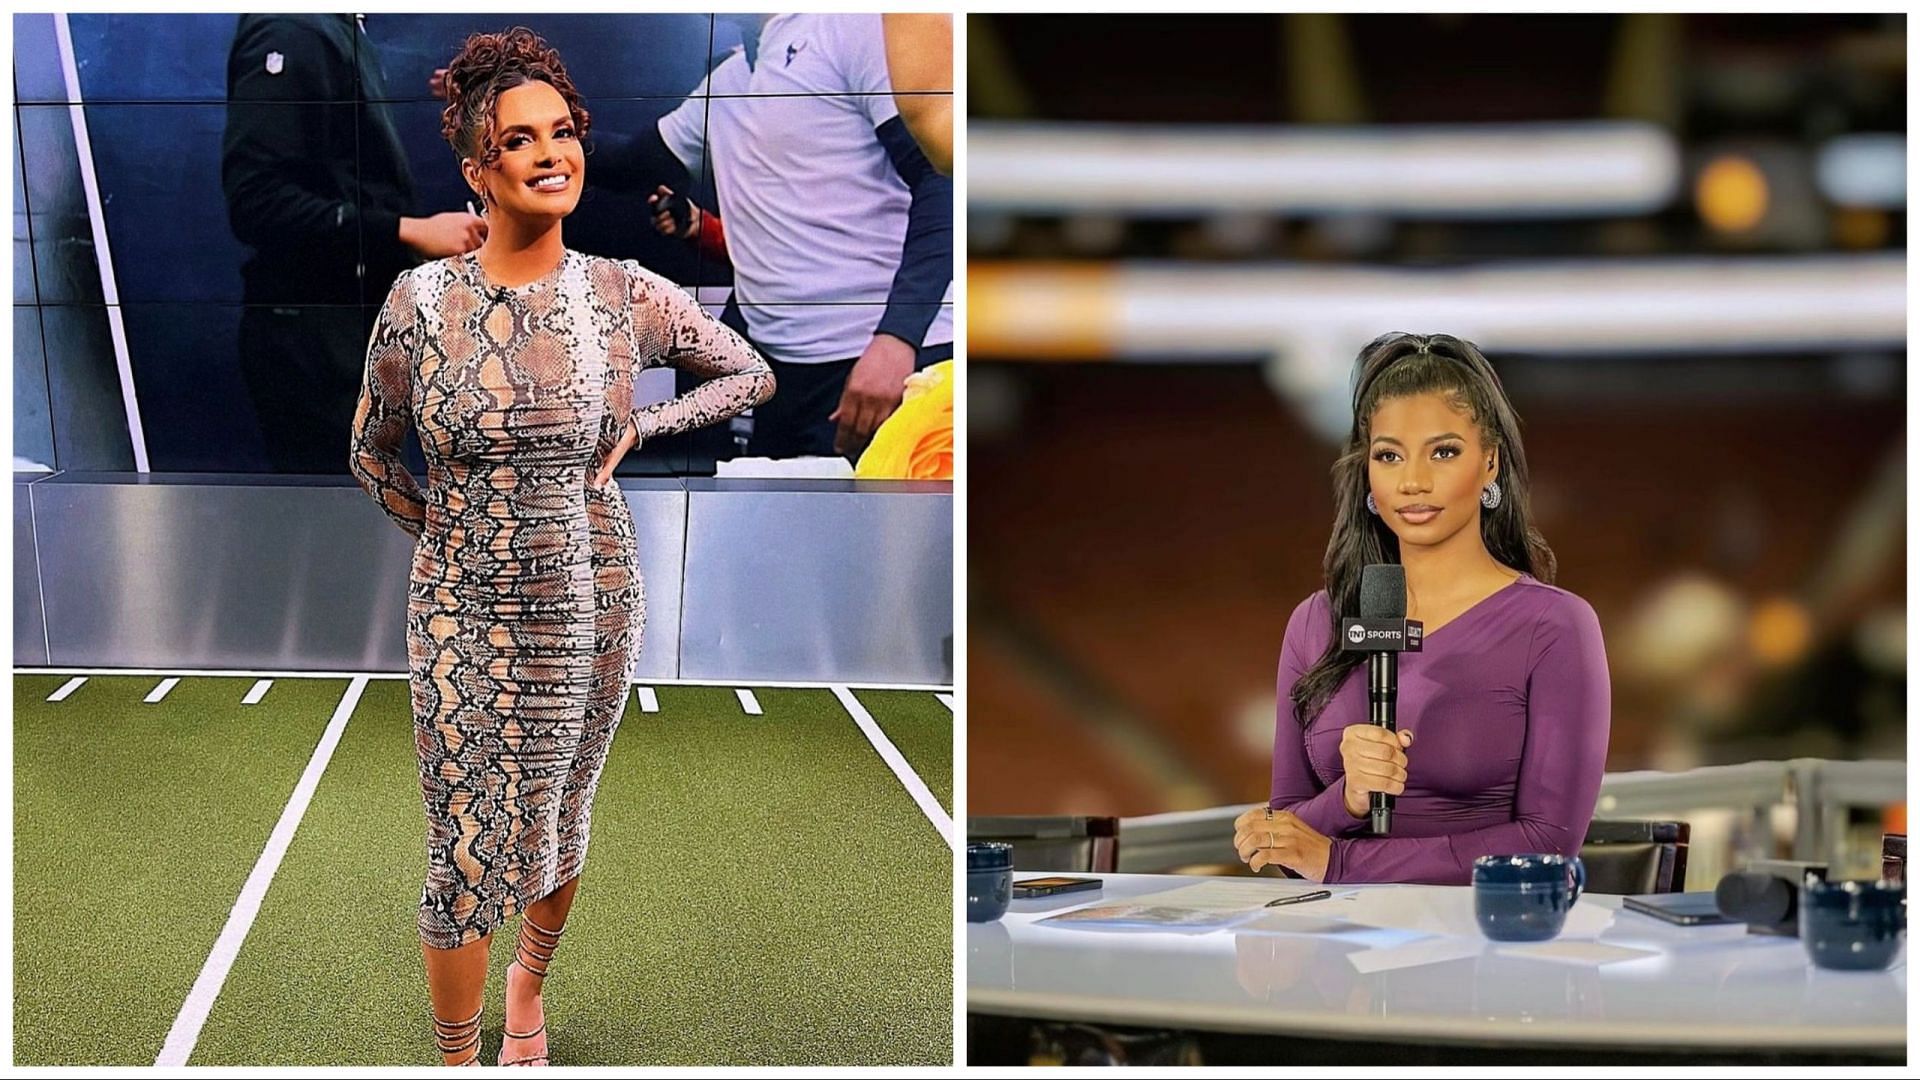 Taylor Rooks and Joy Taylor collab on brand new podcast garners reactions from NBA fans